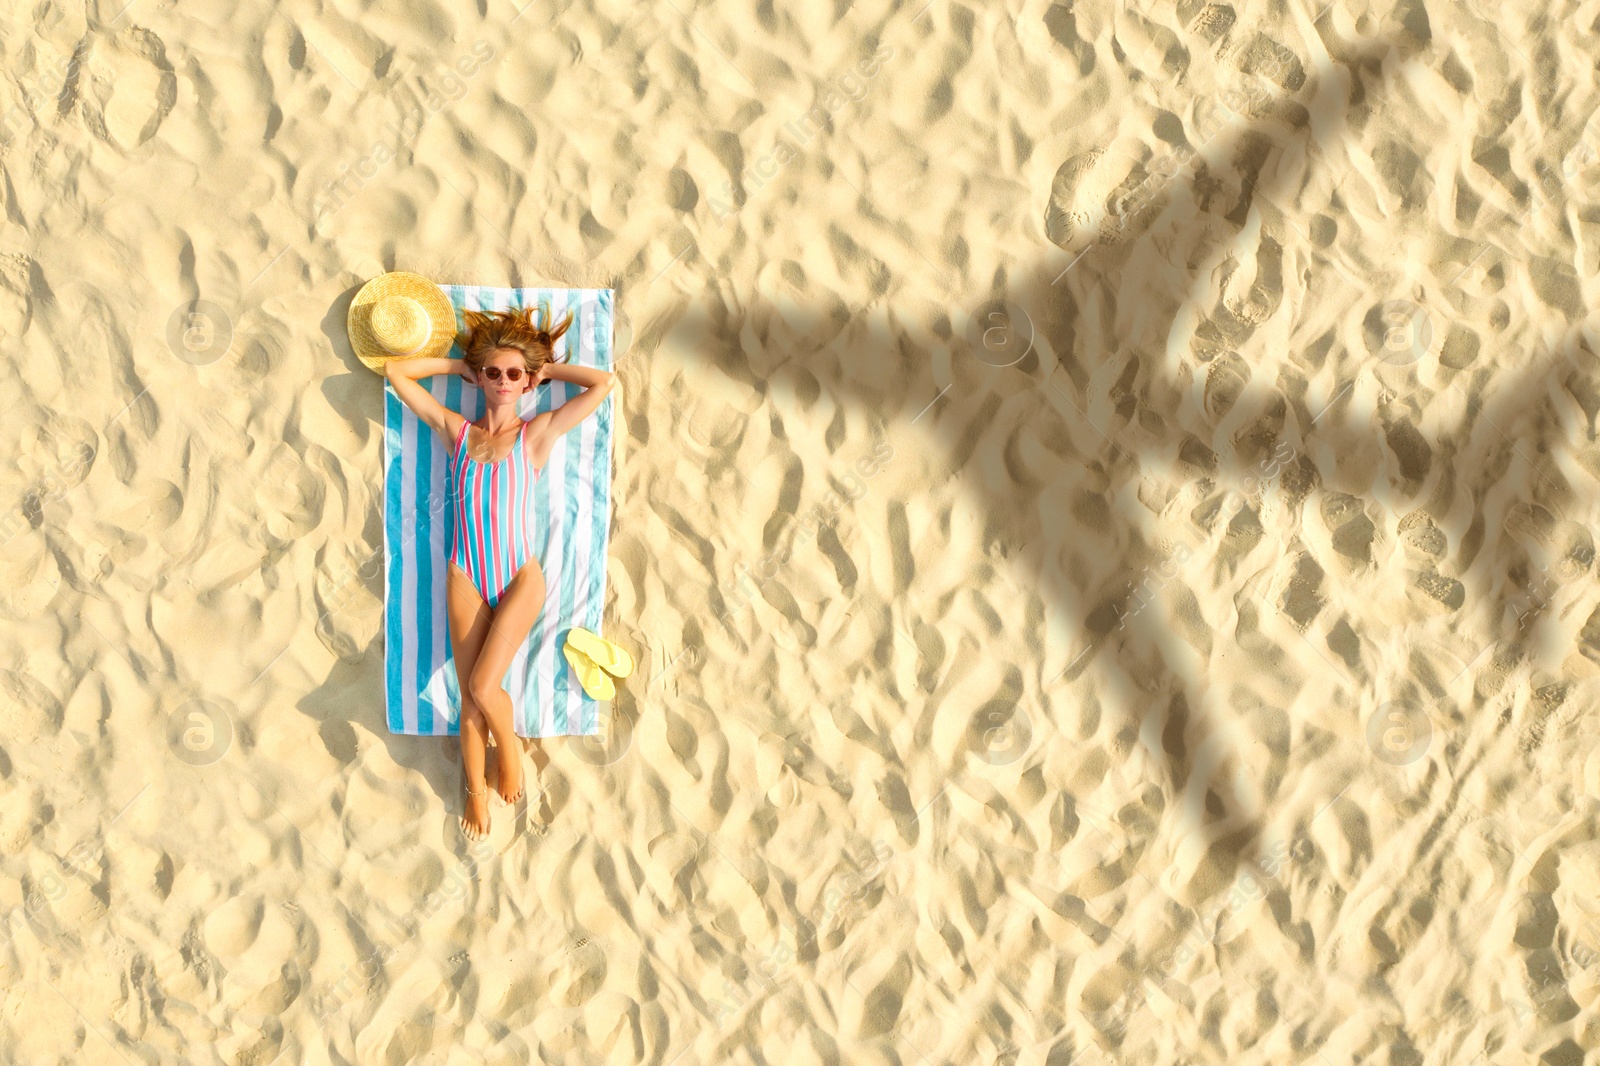 Image of Shadow of airplane and woman sunbathing at sandy beach, aerial view. Summer vacation